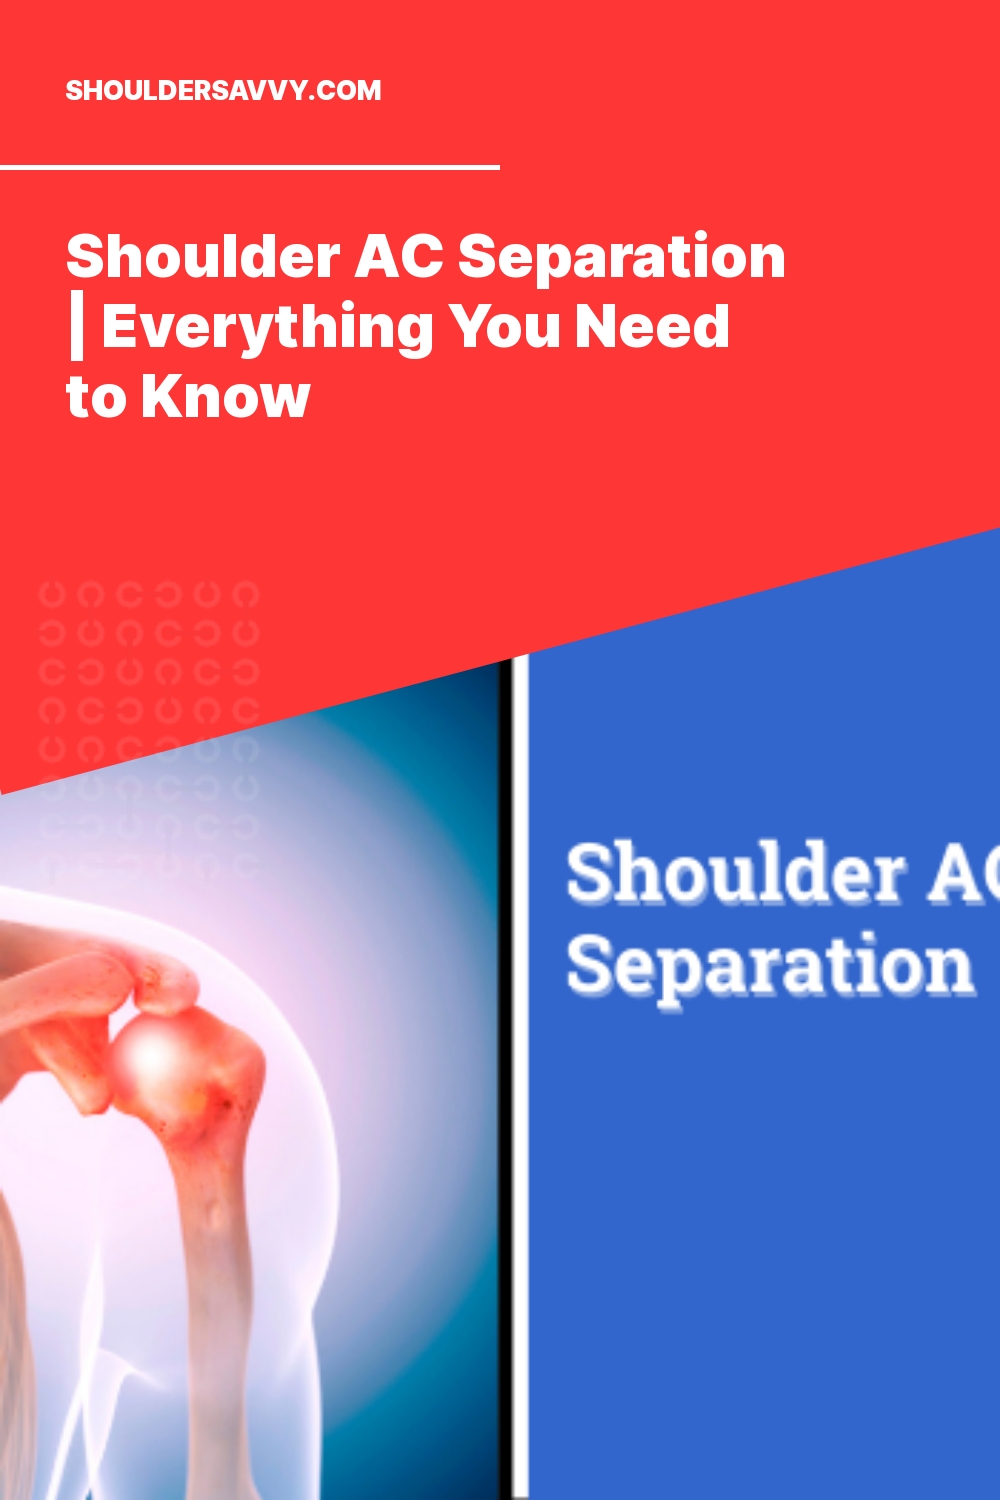 Shoulder AC Separation | Everything You Need to Know